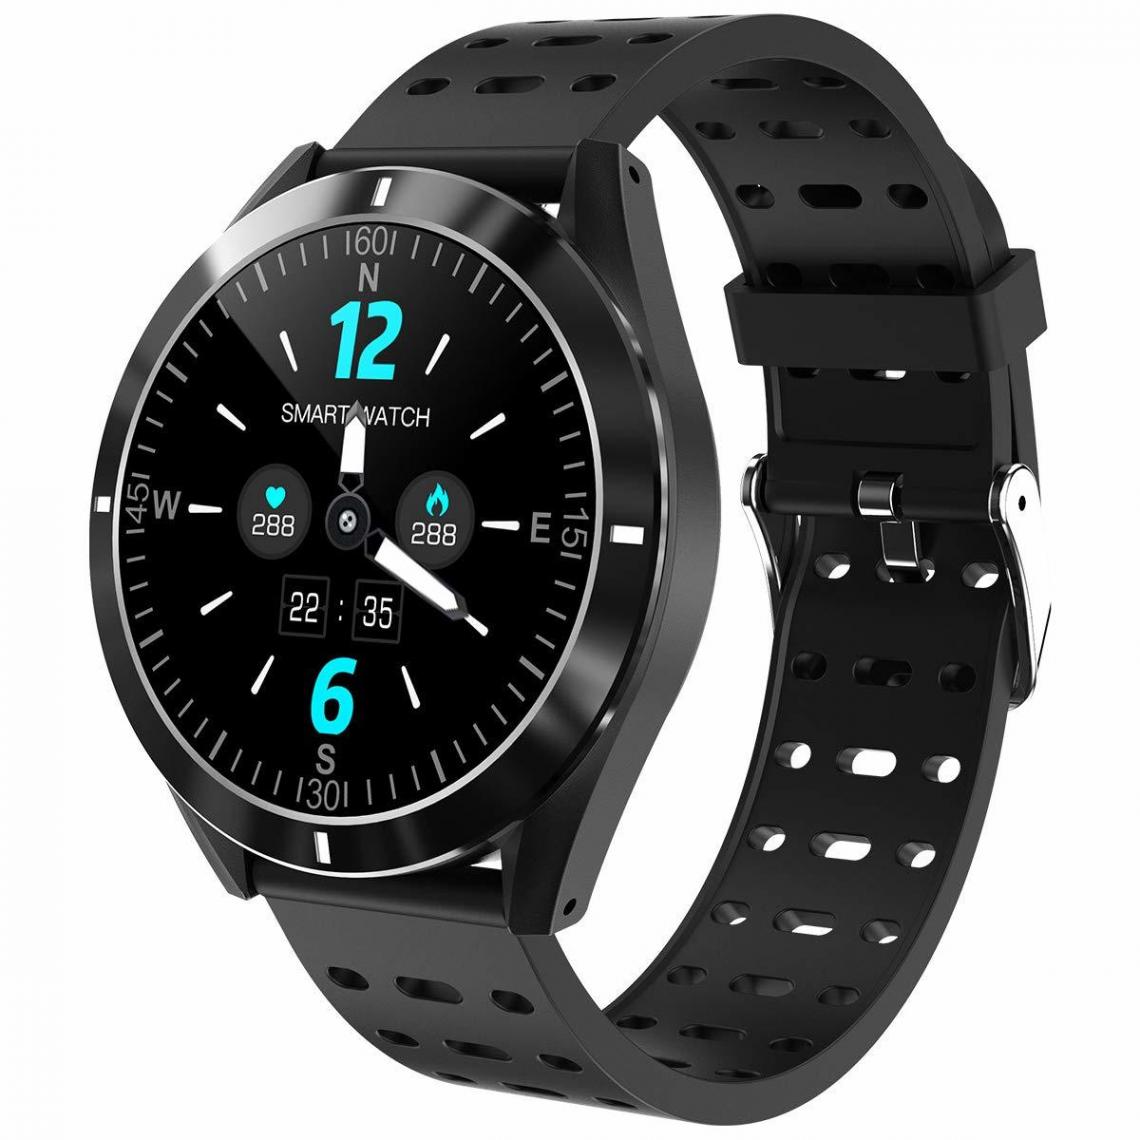 Chronotech Montres - Smart Watch Heart Rate Blood Pressure Monitor Outdoor Survival Hiking Fitness Trackers Step Colries Counter Fashion (black) - Montre connectée